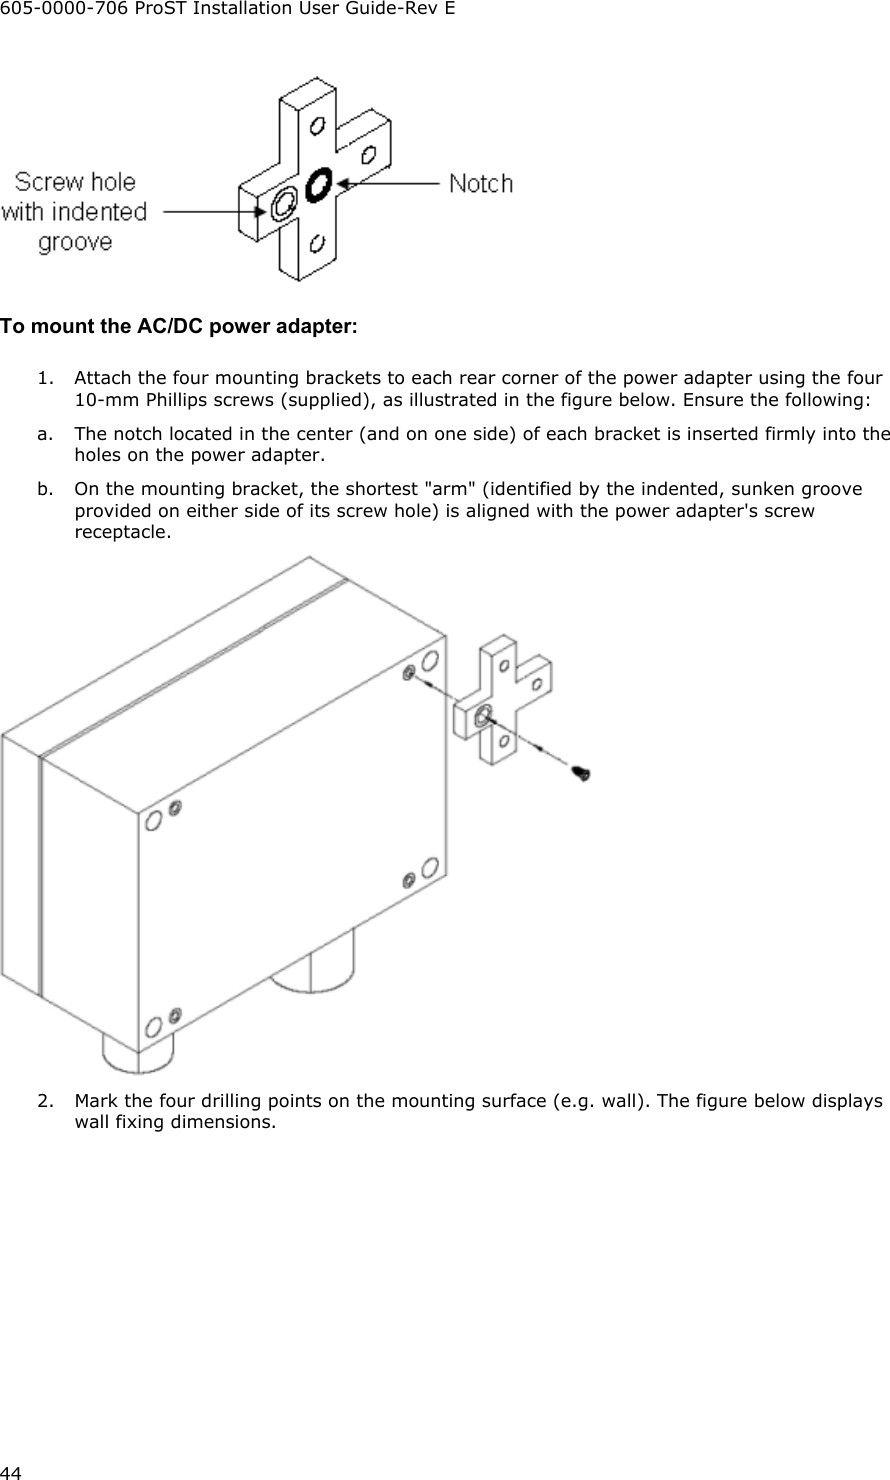 605-0000-706 ProST Installation User Guide-Rev E 44  To mount the AC/DC power adapter: 1.  Attach the four mounting brackets to each rear corner of the power adapter using the four 10-mm Phillips screws (supplied), as illustrated in the figure below. Ensure the following: a.  The notch located in the center (and on one side) of each bracket is inserted firmly into the holes on the power adapter. b.  On the mounting bracket, the shortest &quot;arm&quot; (identified by the indented, sunken groove provided on either side of its screw hole) is aligned with the power adapter&apos;s screw receptacle.  2.  Mark the four drilling points on the mounting surface (e.g. wall). The figure below displays wall fixing dimensions. 